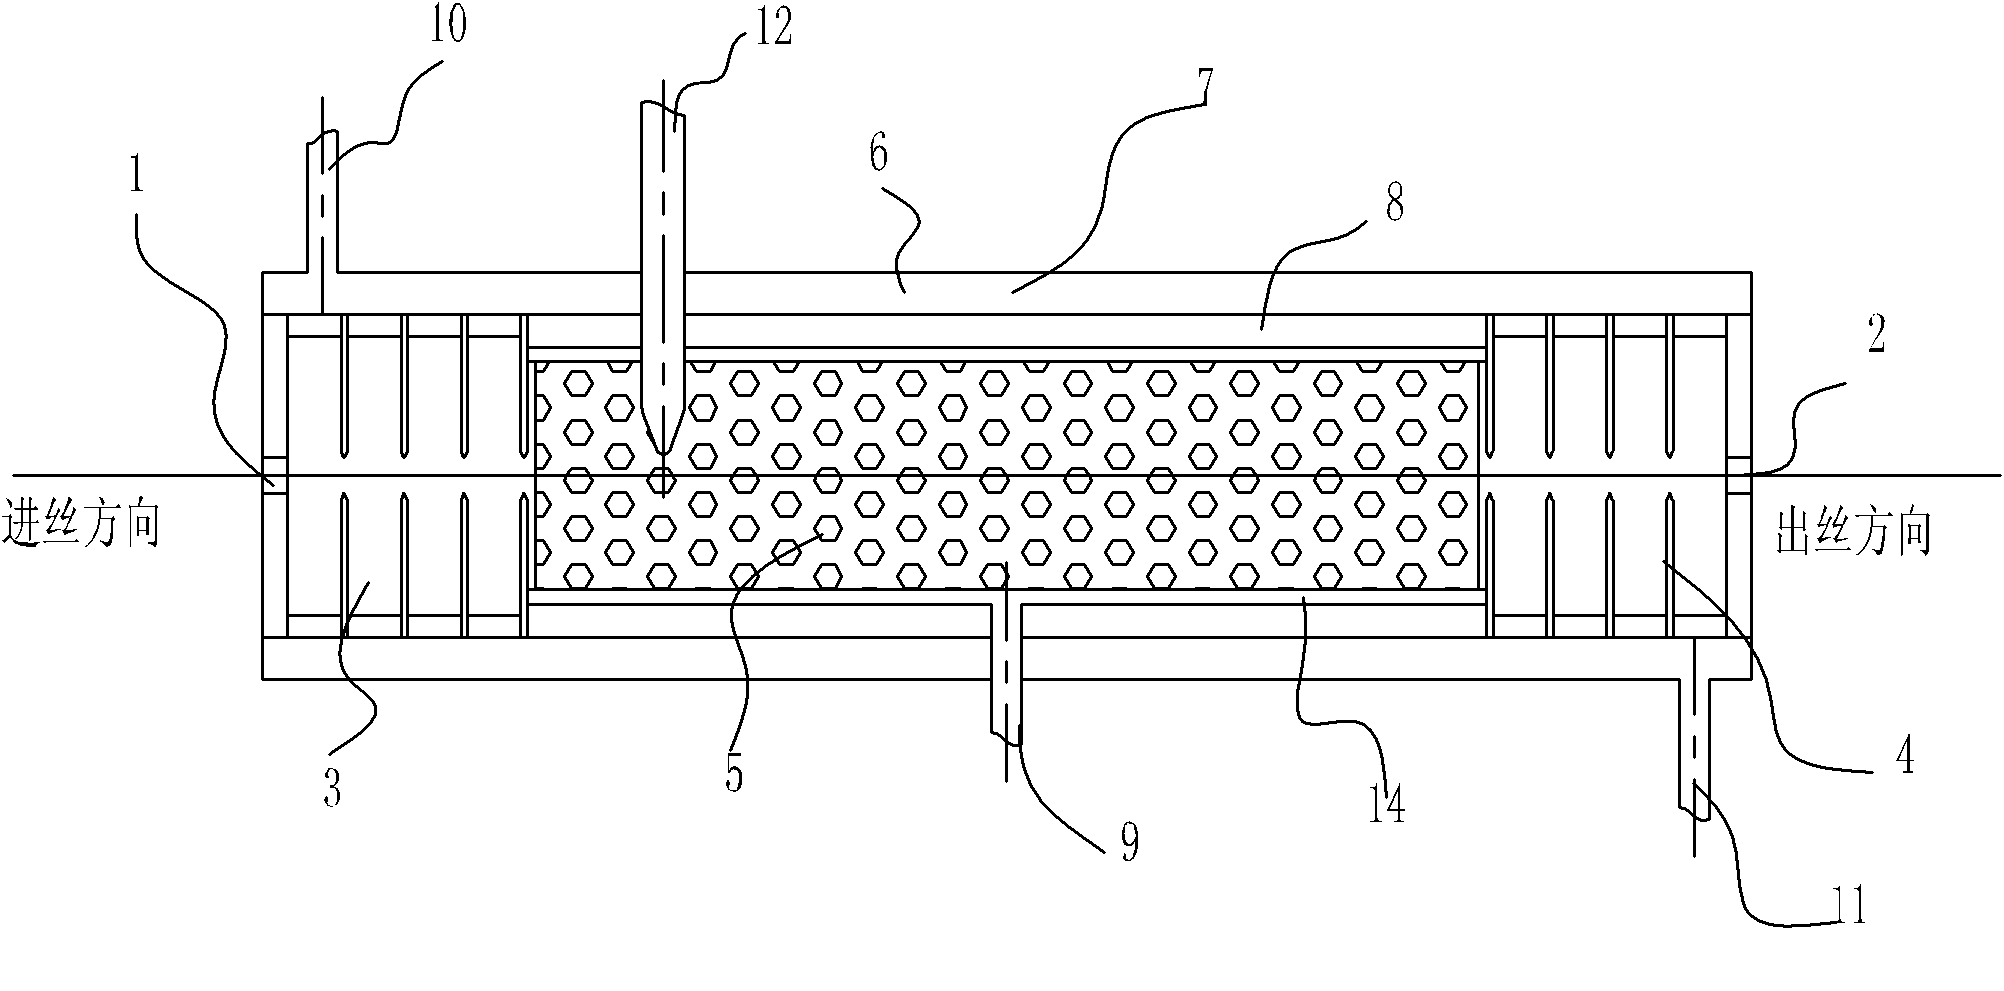 Pressurized steam drawing machine for drawing fibers